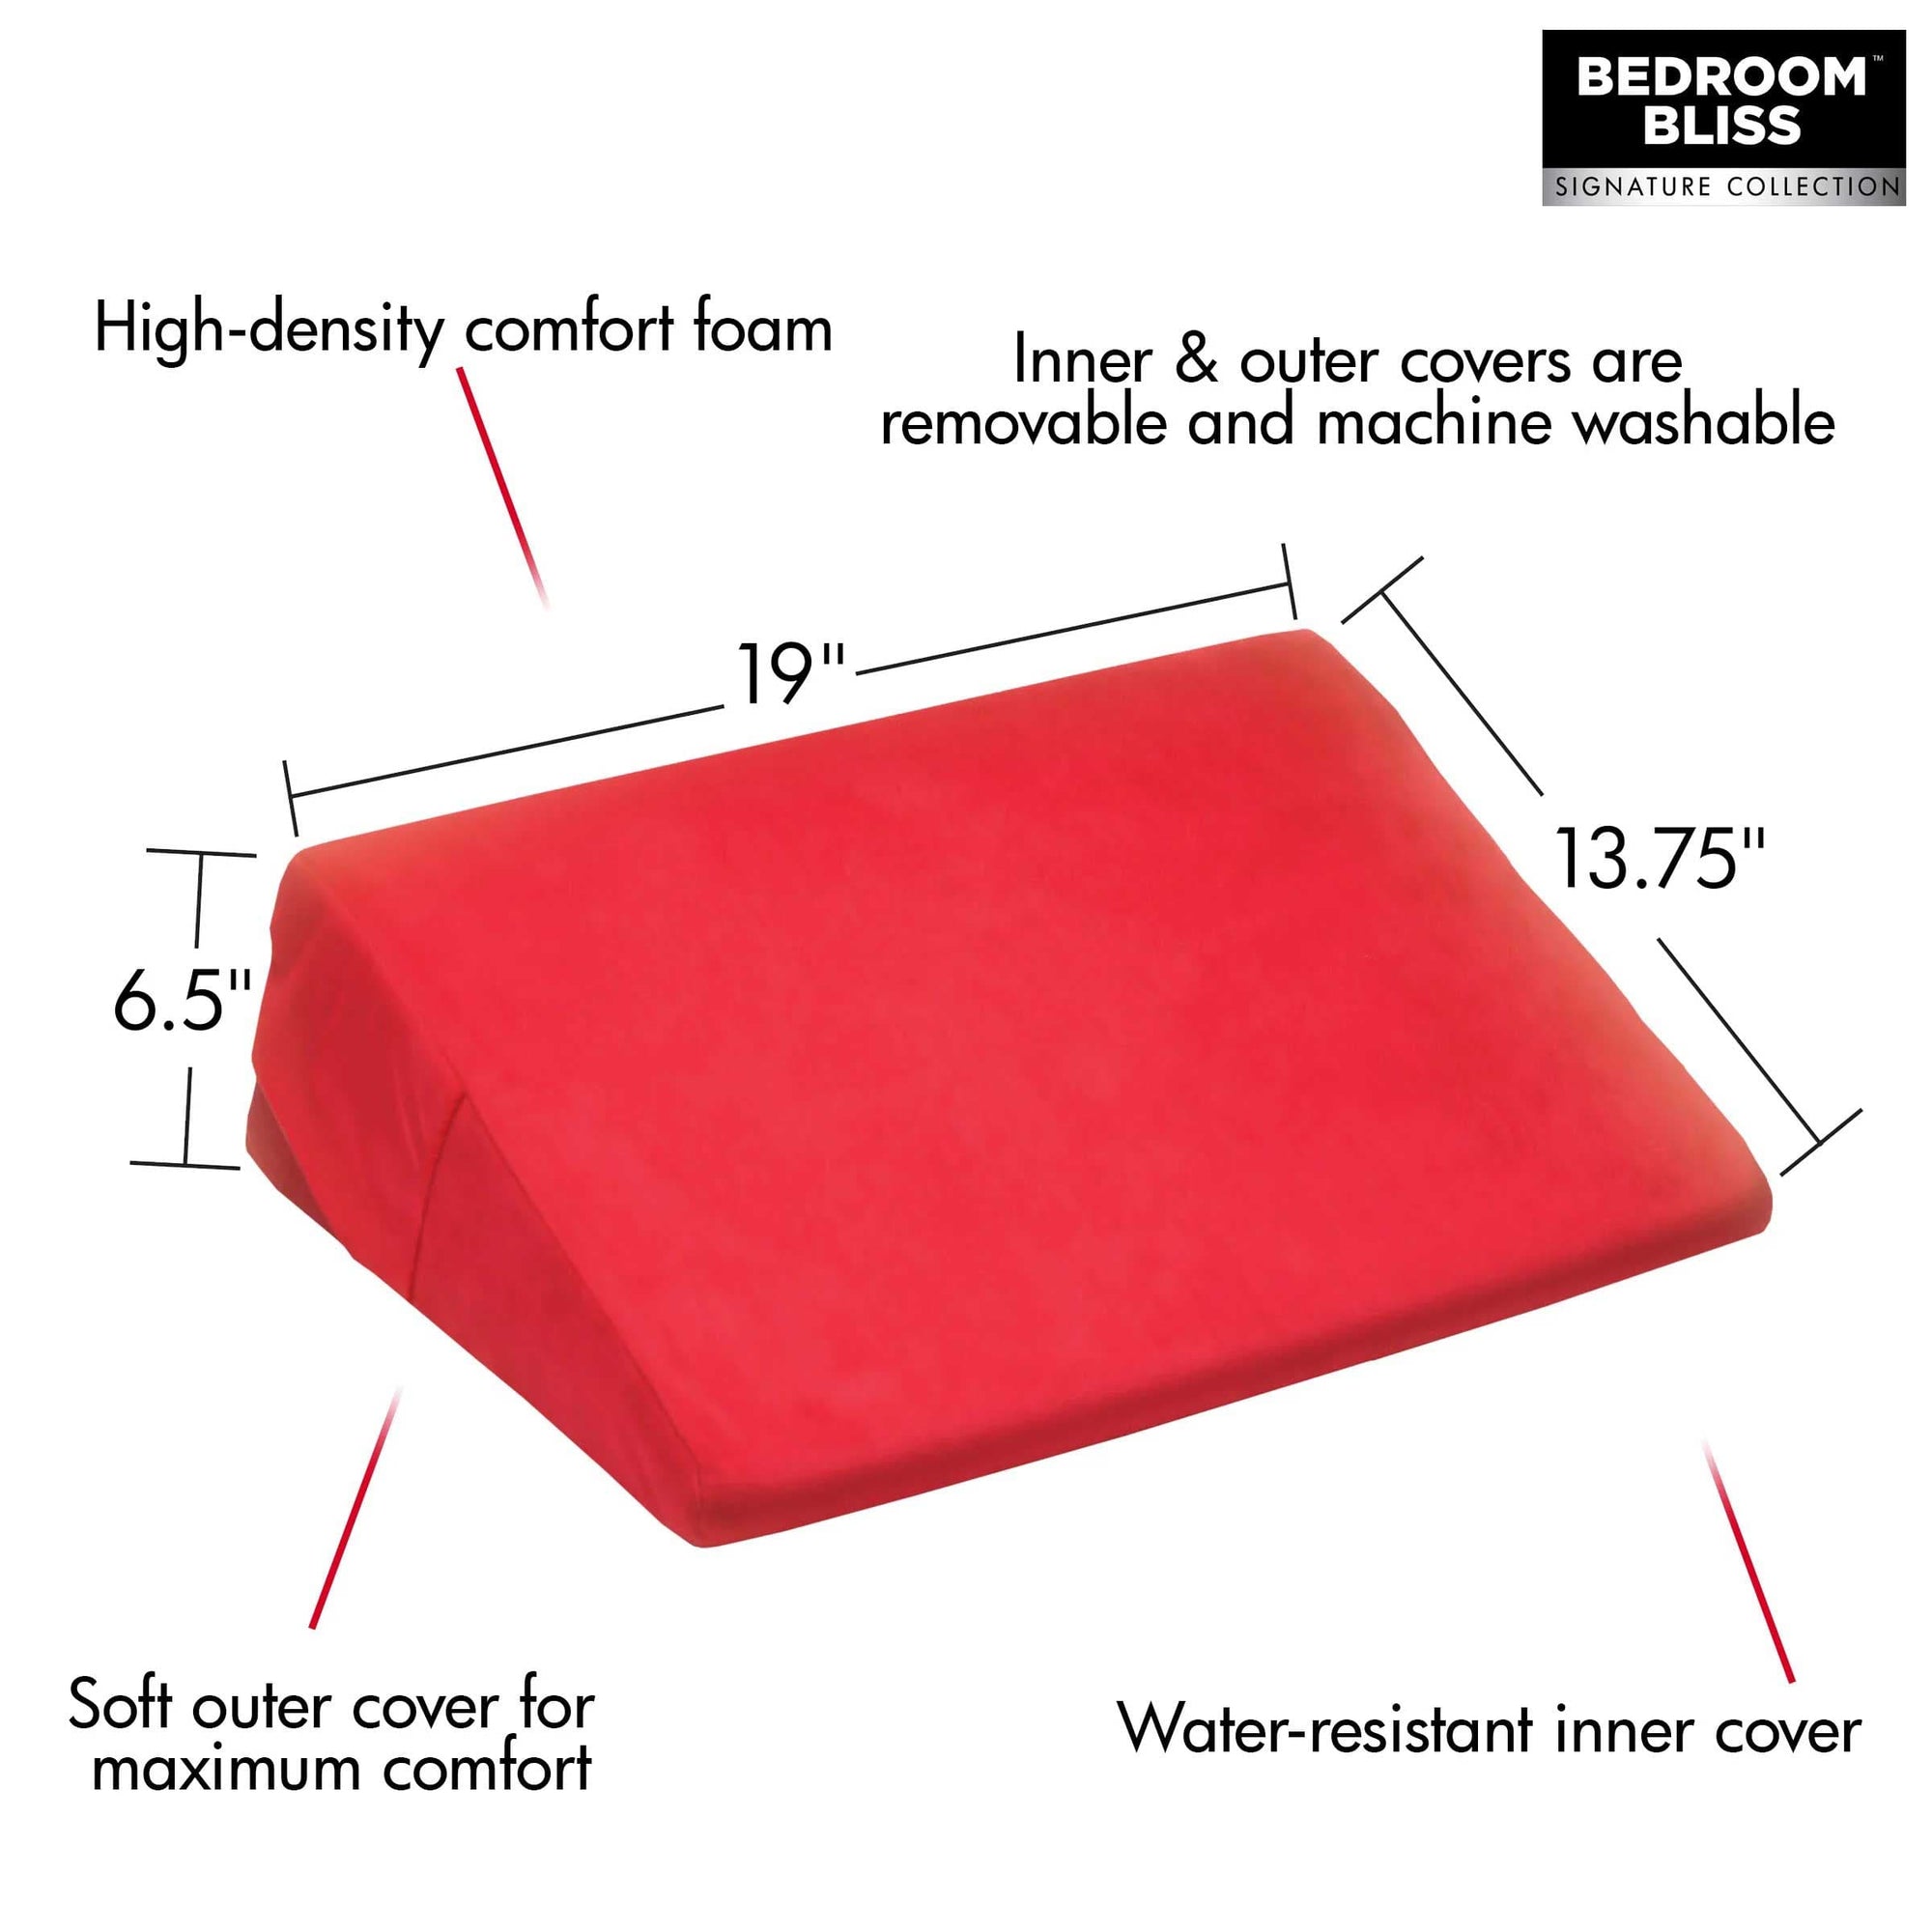 positioning wedge pillow uses, positioning wedge pillow